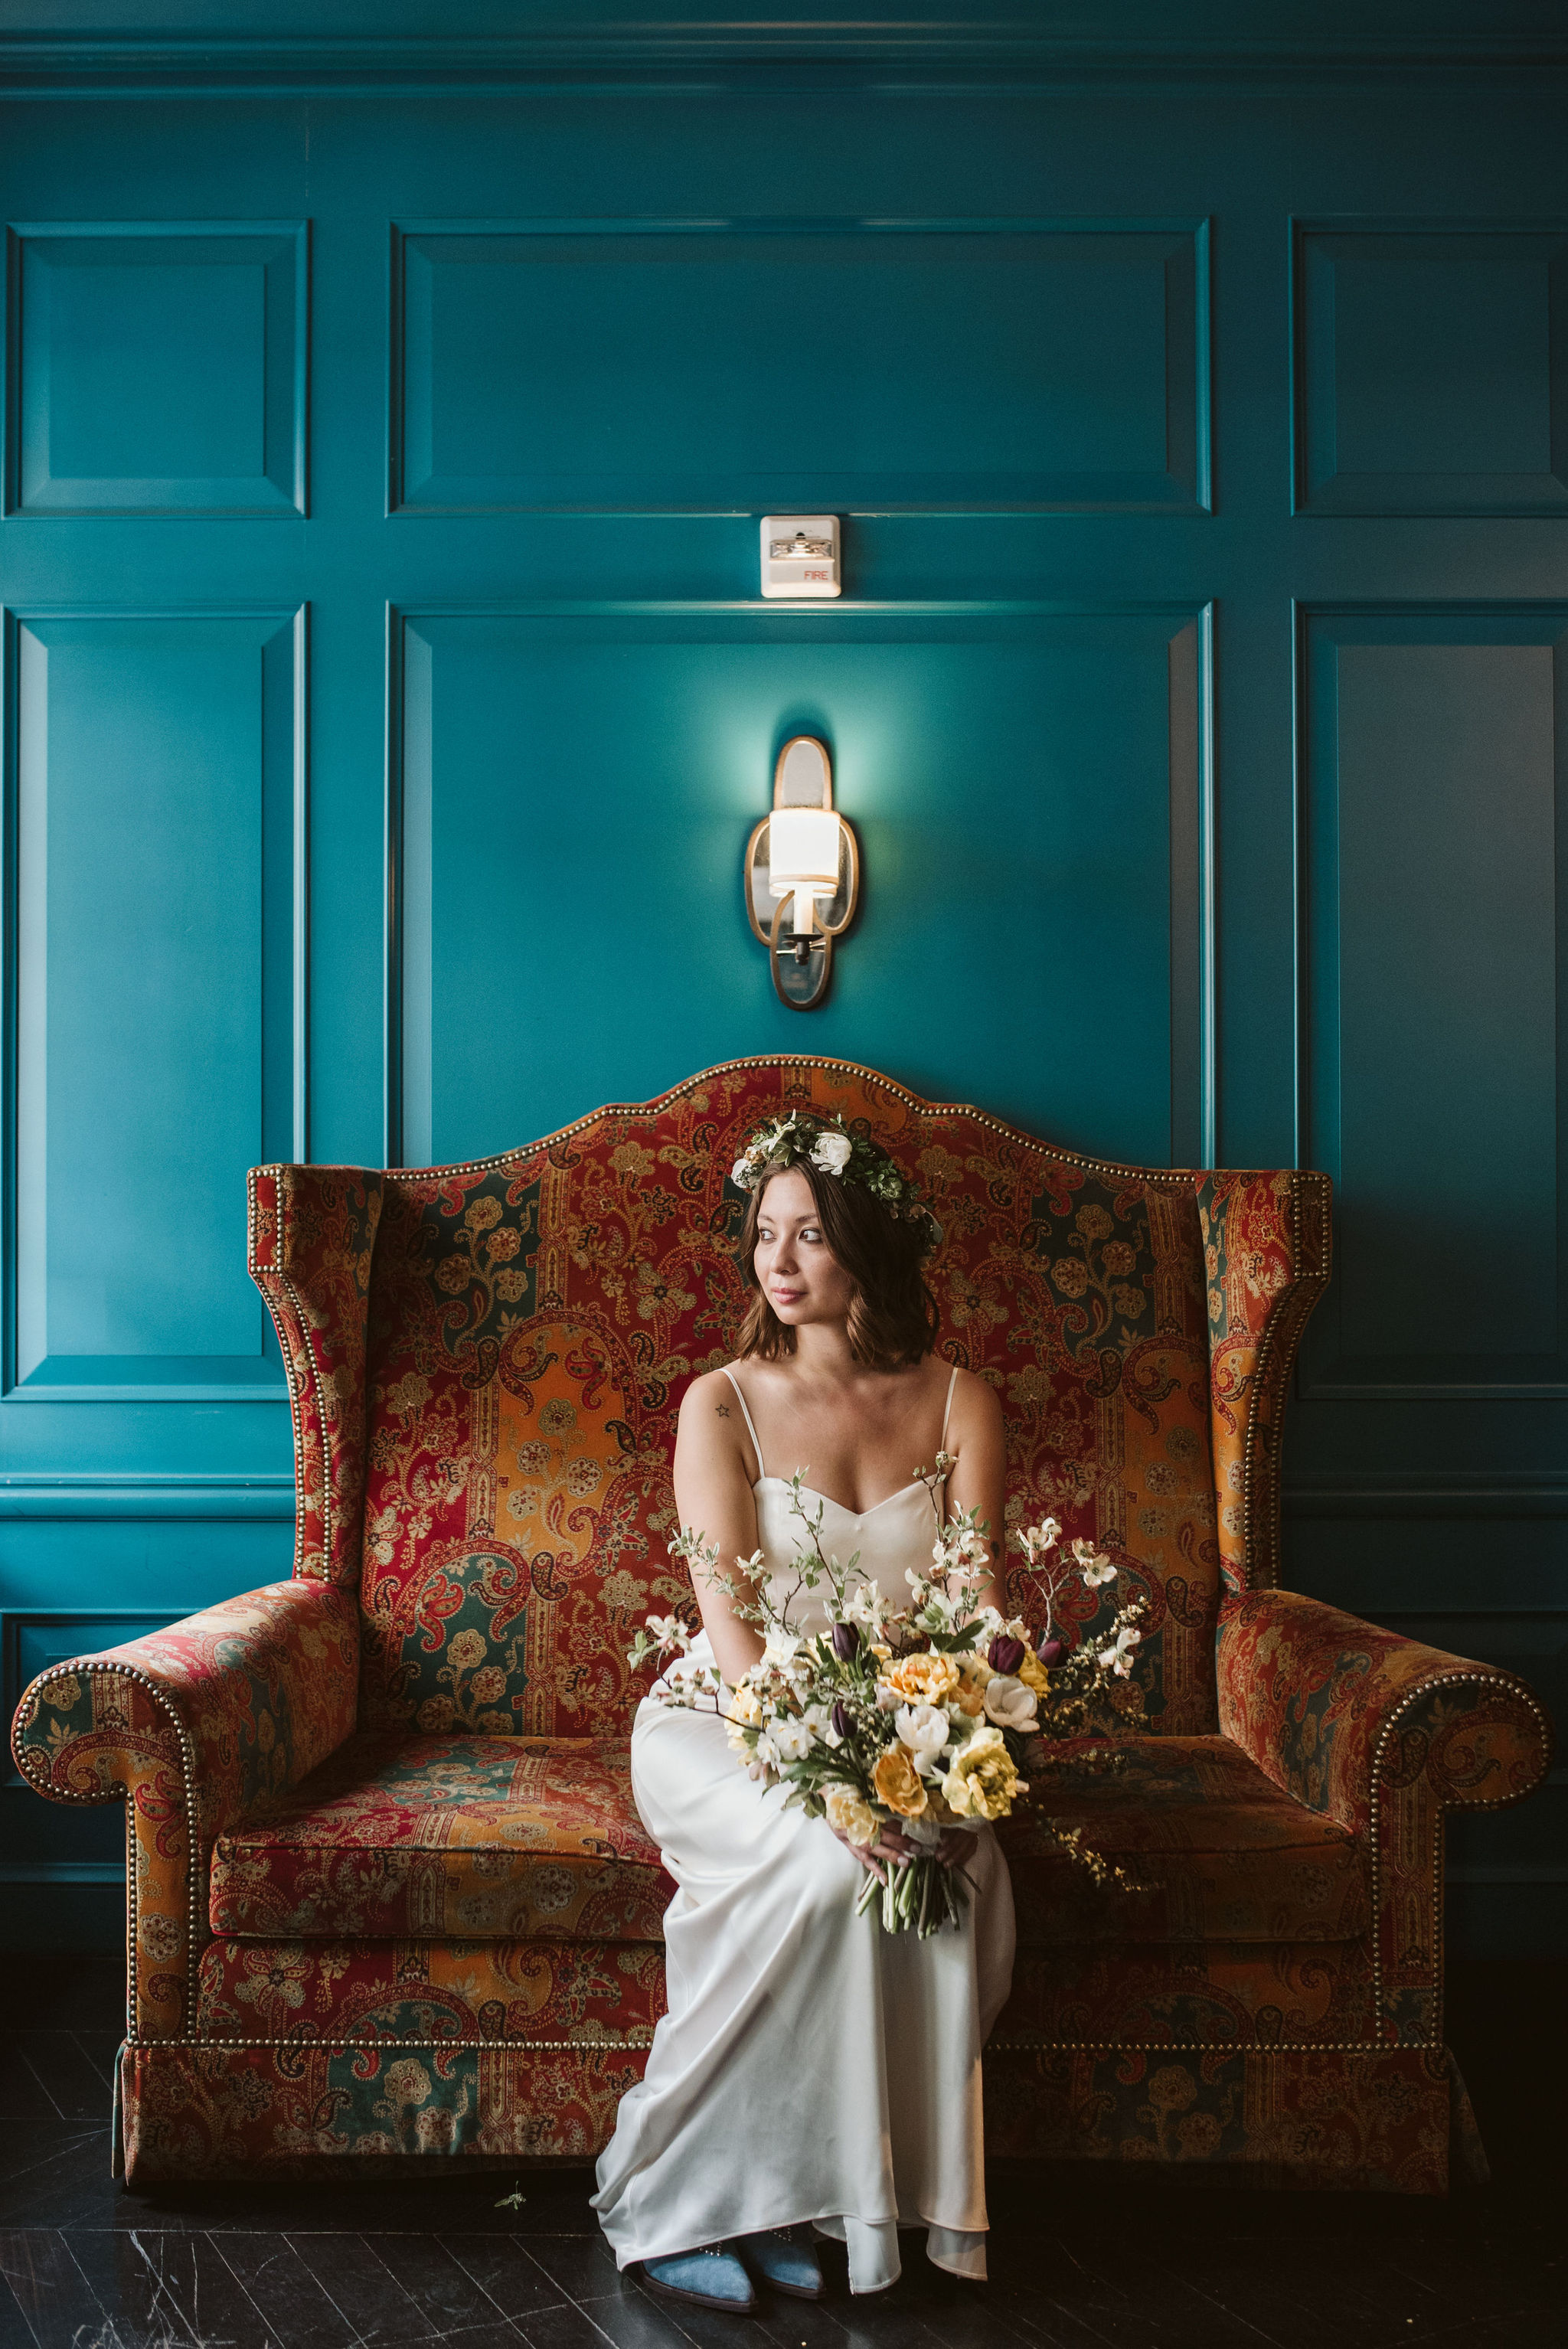  Washington DC, Baltimore Wedding Photographer, Alexandria, Old Town, Jewel Tone, Romantic, Modern, The Alexandrian Autograph Collection Hotel, Portrait of bride on red vintage couch in satin wedding dress 